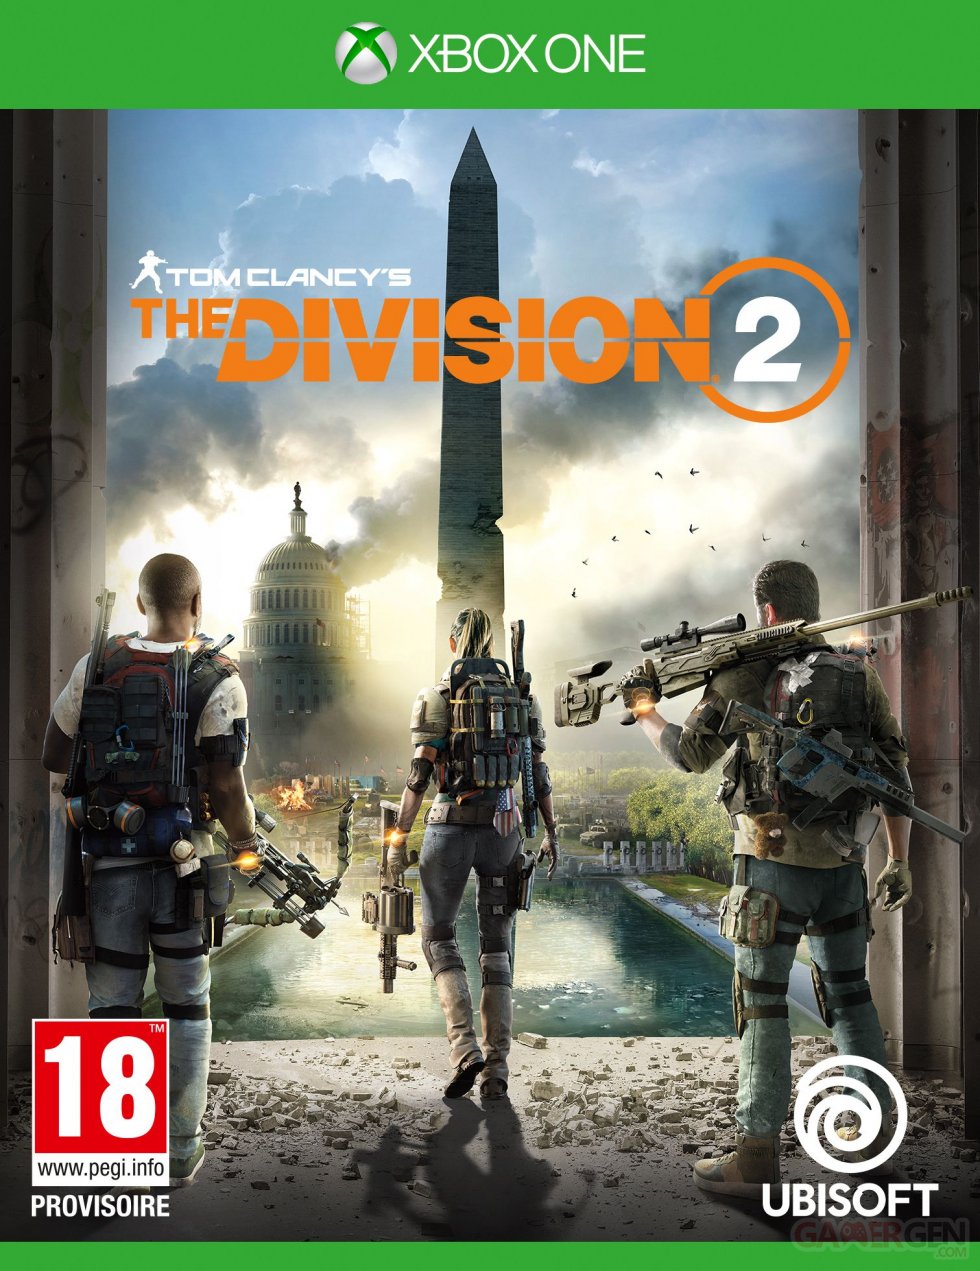 The-Division-2-jaquette-Xbox-One-12-06-2018